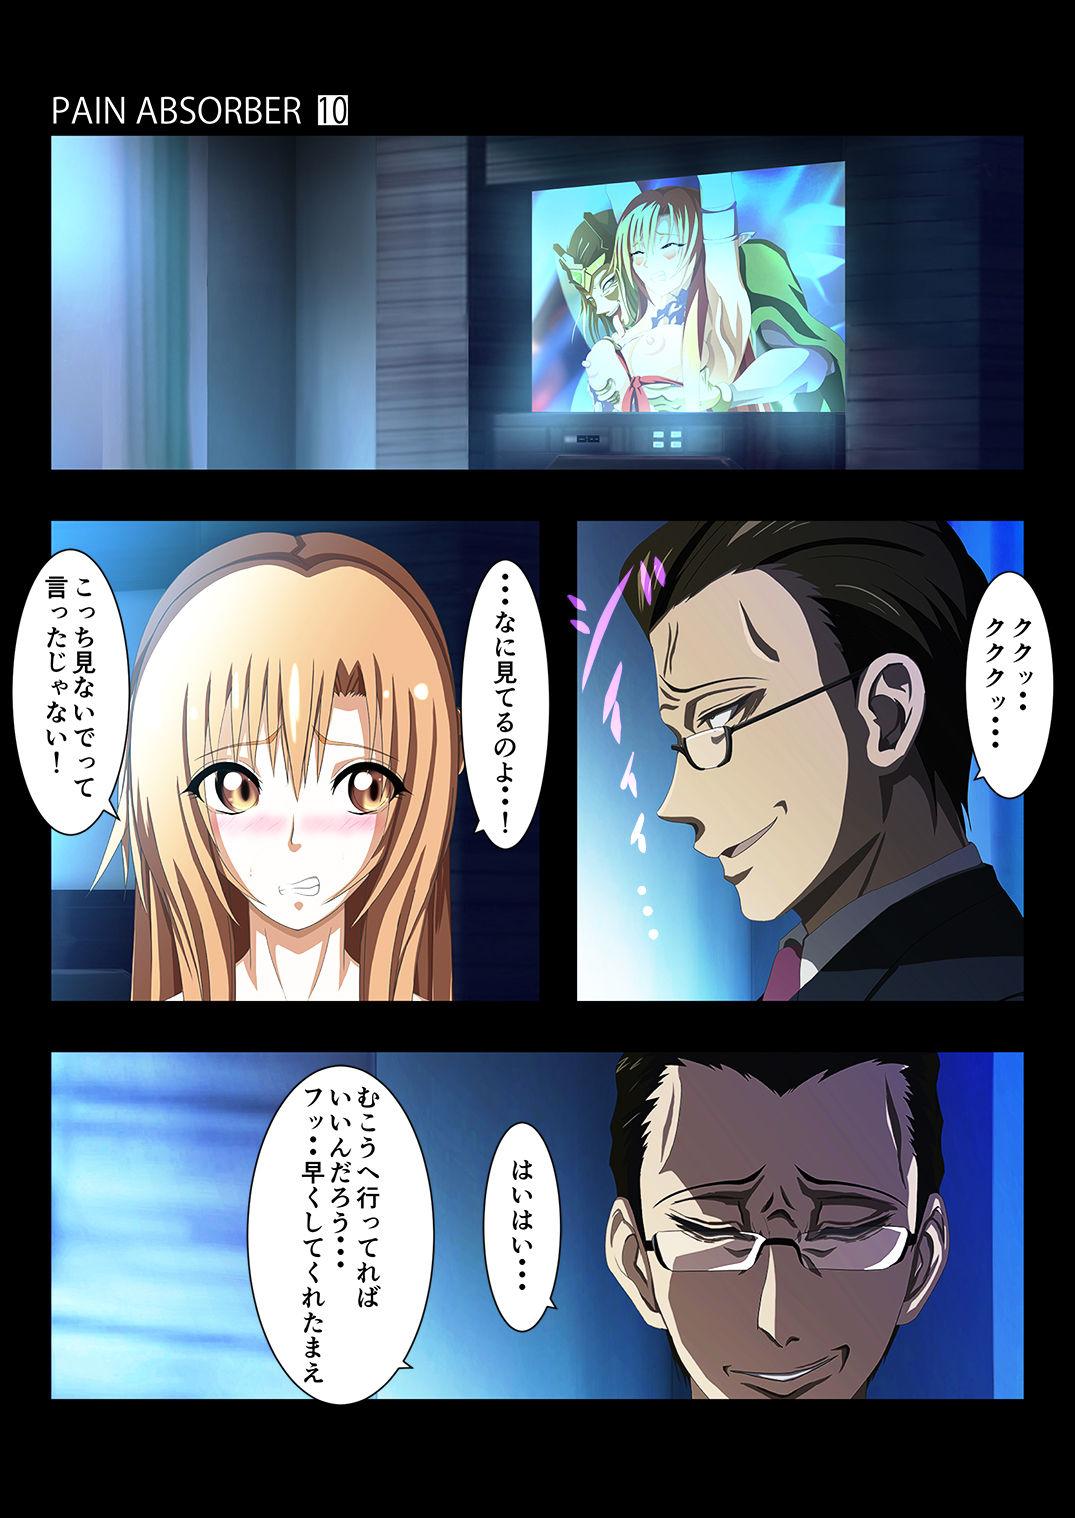 Stripping PAIN ABSORBER 10 - Sword art online Pov Blowjob - Page 4